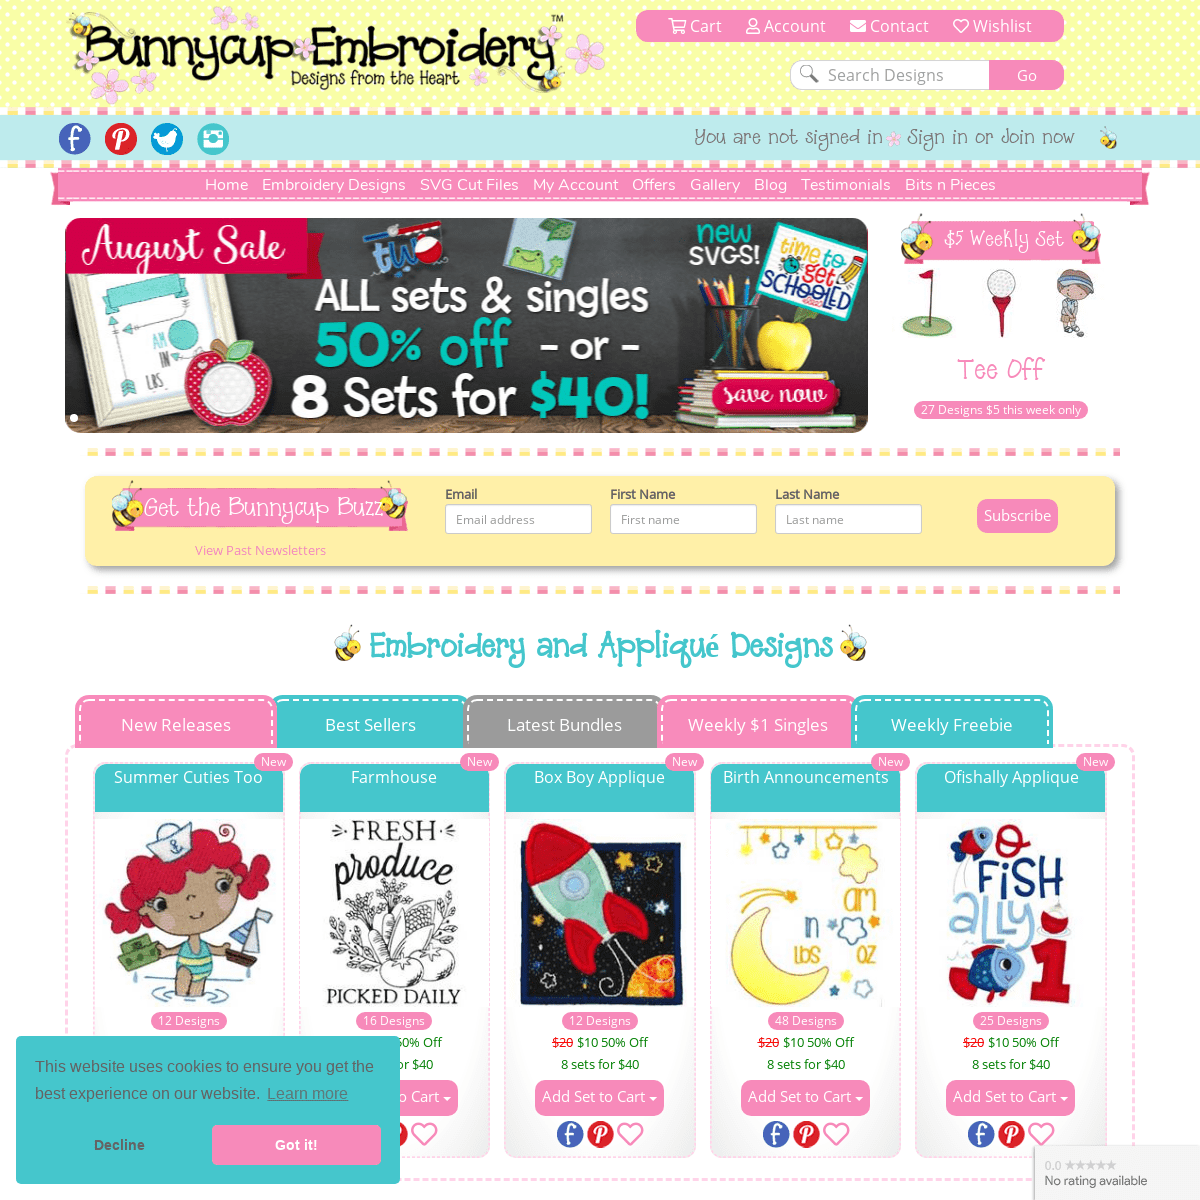 A complete backup of bunnycup.com